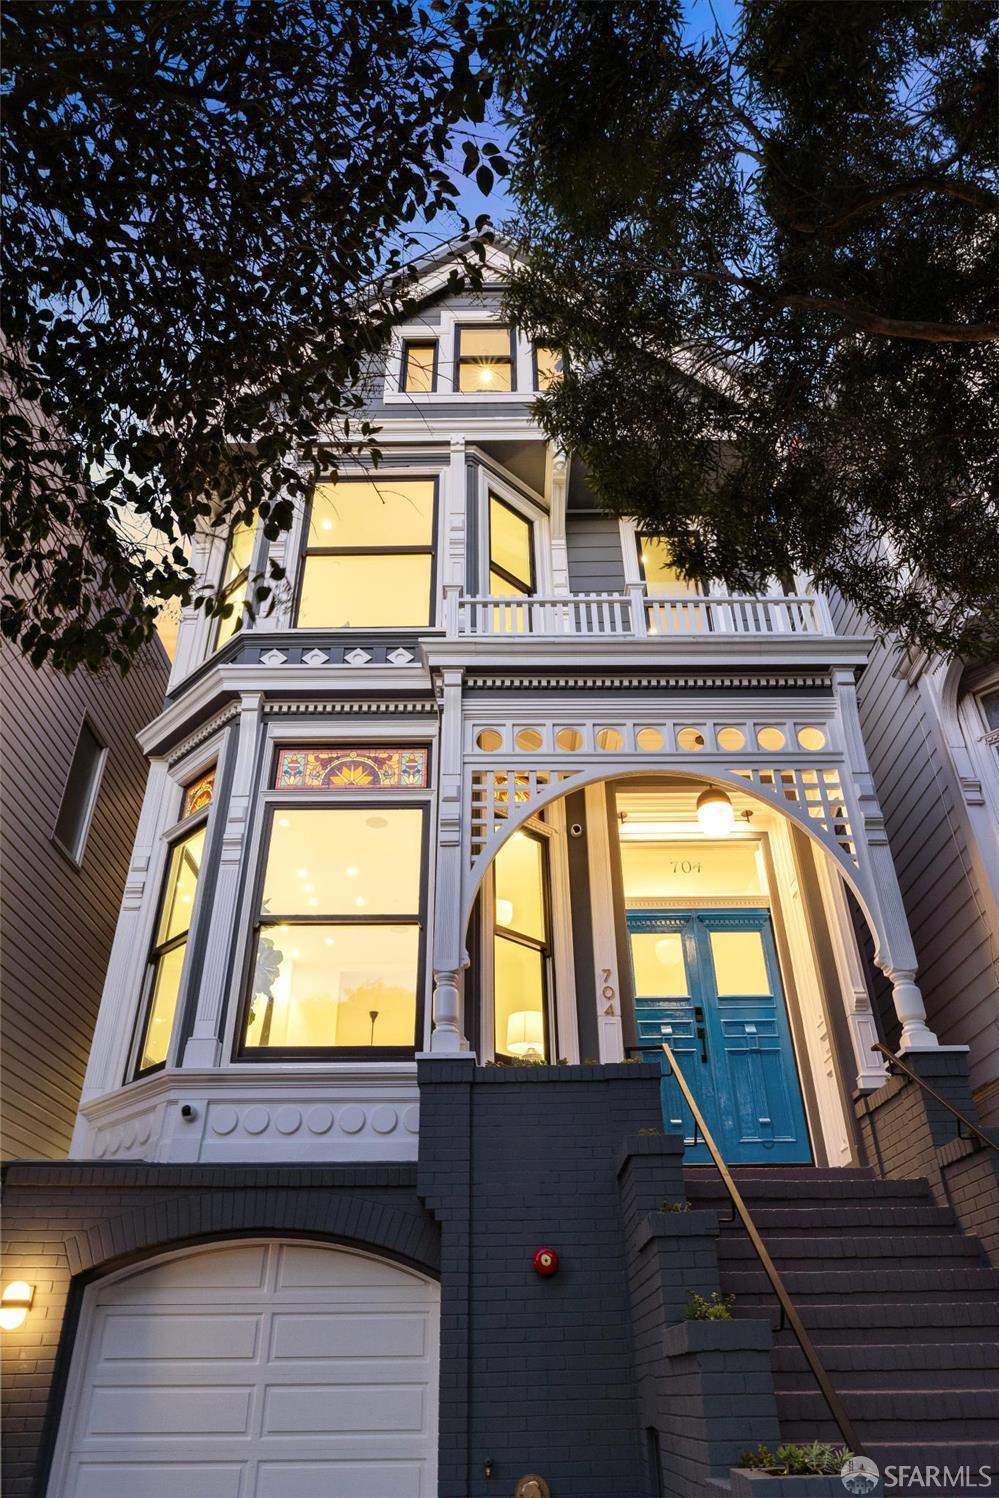 Nestled in San Francisco's vibrant Haight-Ashbury neighborhood, 704 Ashbury Street seamlessly merges historical charm with contemporary luxury. Originally built in 1890 and meticulously renovated down to the studs, this Victorian masterpiece spans 4 levels, an elevator to all levels and boasting 4,961 sqft with 5 beds, 4 full baths, and 2 powder rooms. Upon entry, the expansive open floor plan with 11+ feet high ceilings makes you instantly fall in love with the grand atmosphere. Living room offering an ethanol fireplace and original decorated windows exudes character and charm. Open concept kitchen, featuring custom cabinetry and high-end appliances, an extra-large center island. Your ultimate primary suite retreat is located on the top level - offering city views, a spa-like bathroom, a walk-in closet, an office space, and an exclusive laundry room. The Third level offers a family room, 4 beds, and 3 baths, a dedicated laundry room. Bottom level hosts an entertainment room with a wet bar,seamlessly connected to a low maintenance garden. Modern features include built-in speakers,Savant home automation,radiant heating, fire sprinklers, and EV charging. With its central location near parks and shops, this residence embodies the perfect blend of urban living and neighborhood charm.